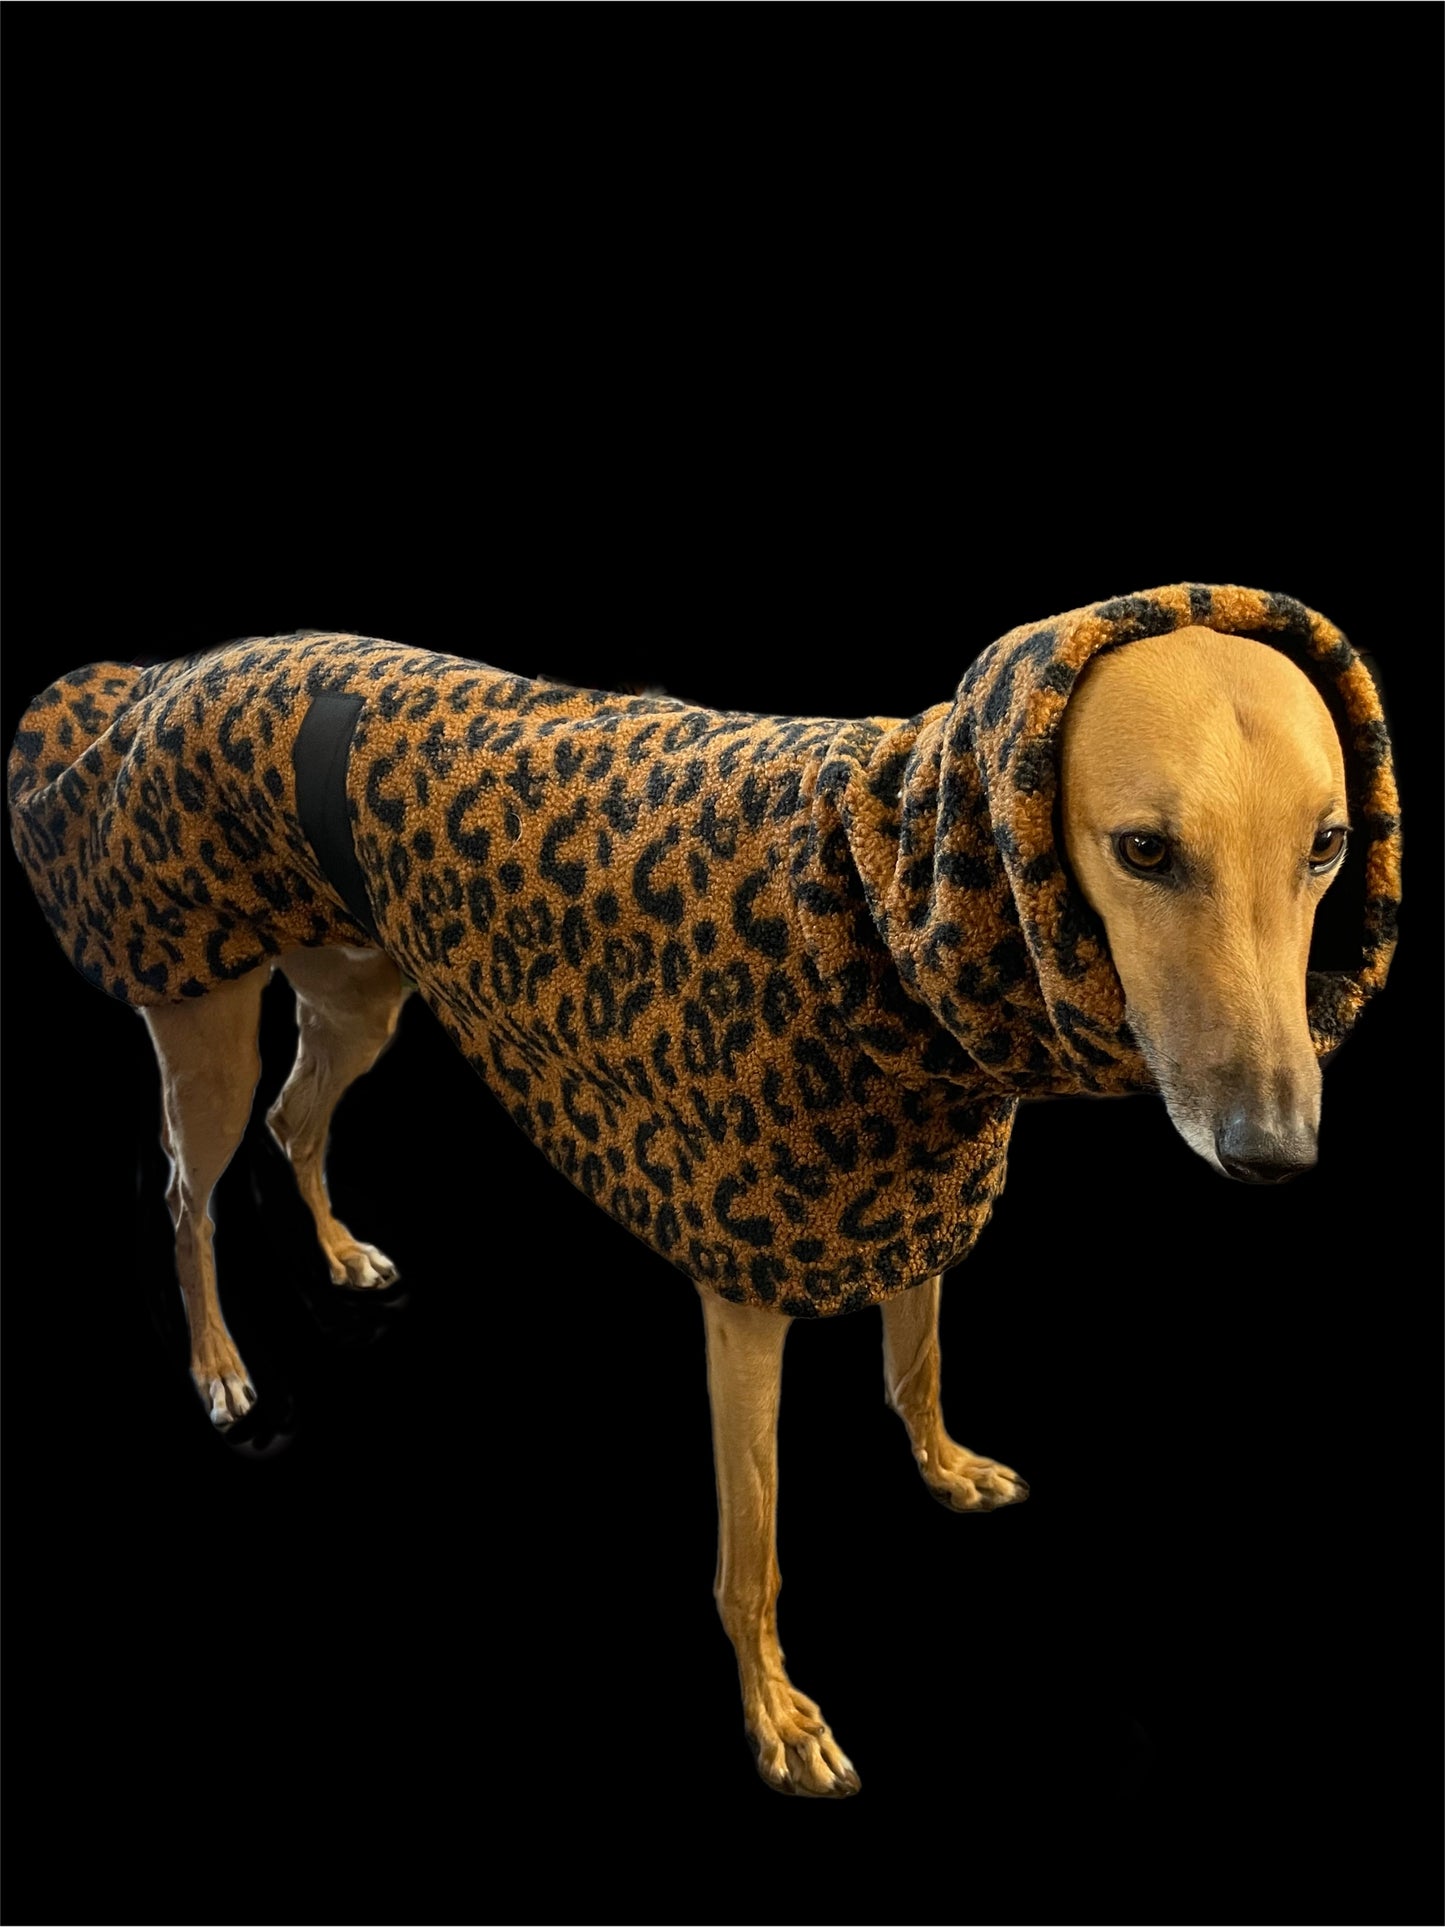 Leopard print Teddy fleece deluxe style greyhound coat with snuggly wide neck roll